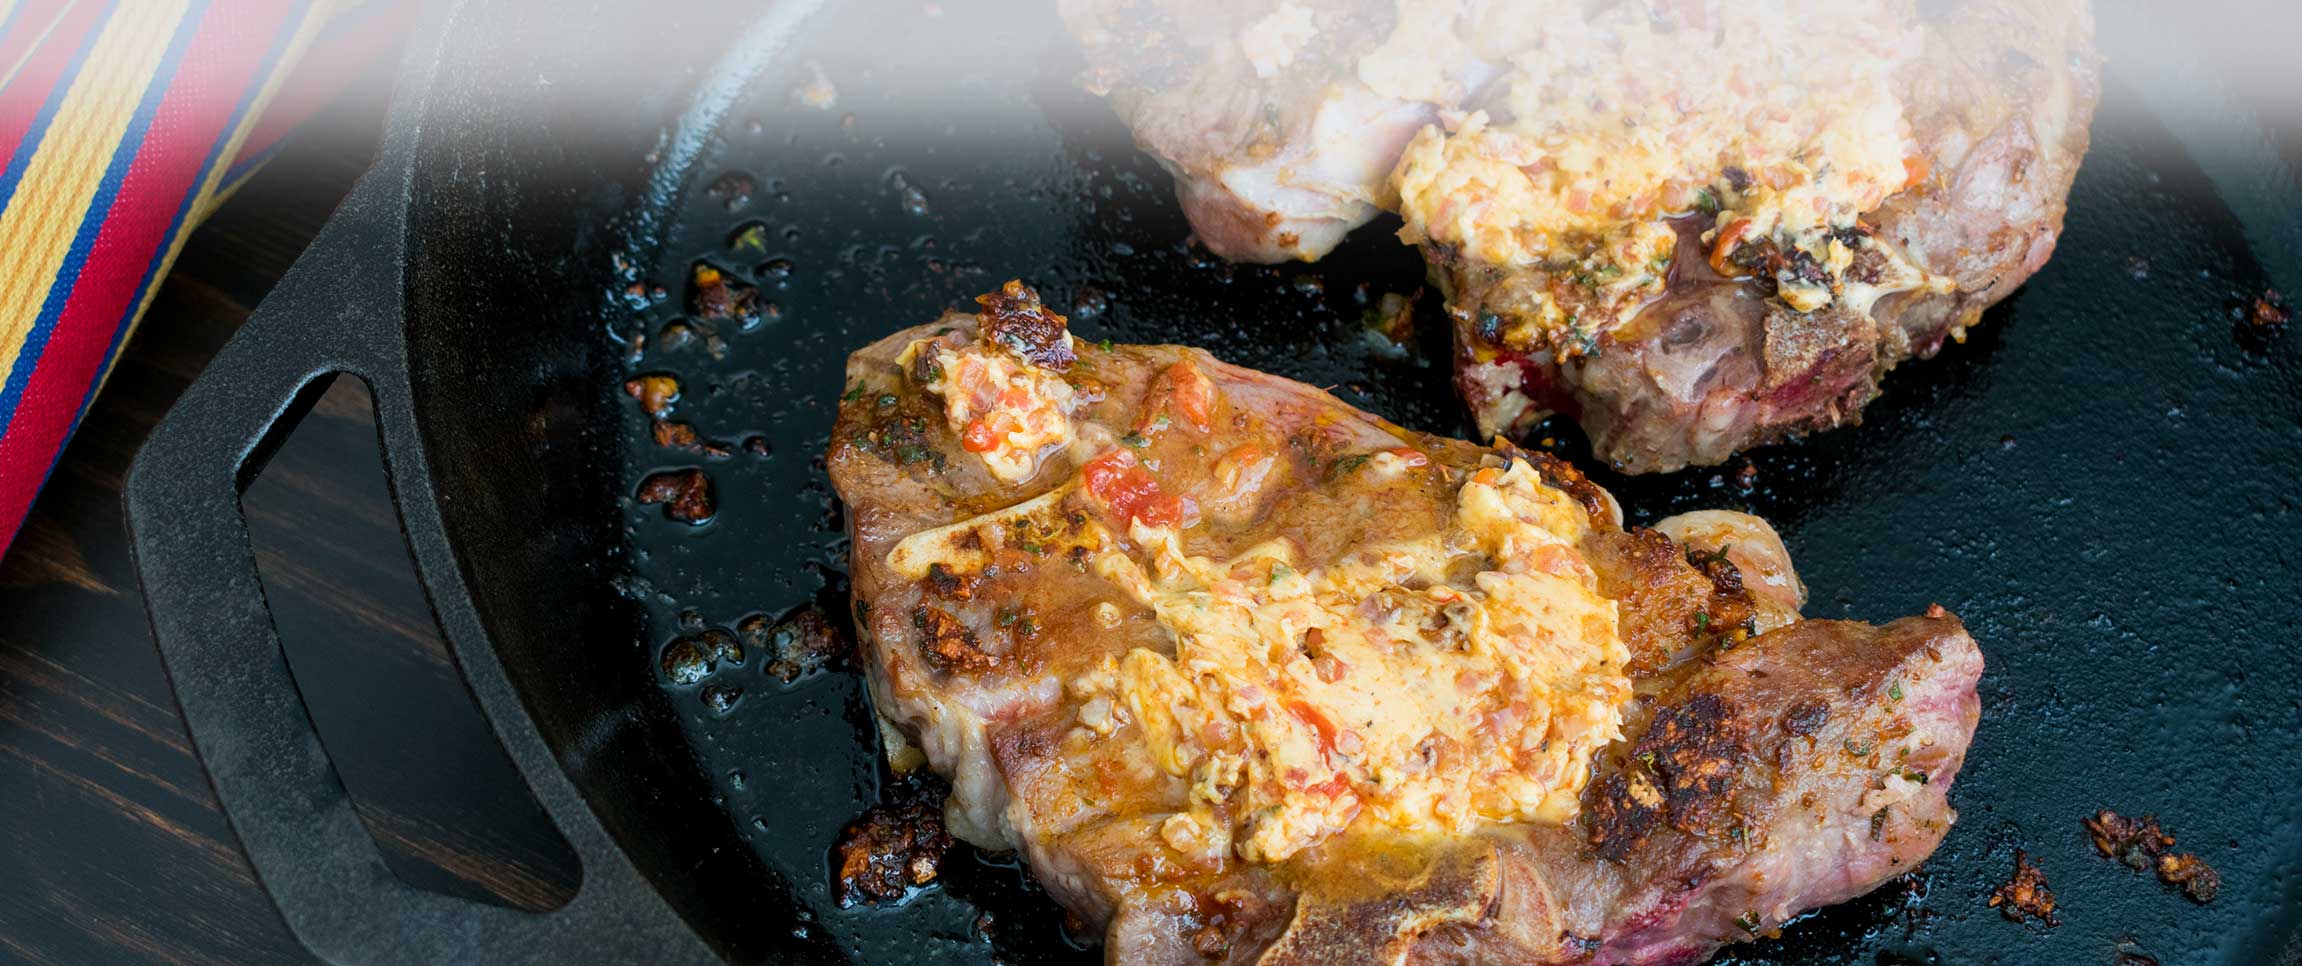 Sun-Dried Tomato Compound Butter Atop Lamb Shoulder Chops